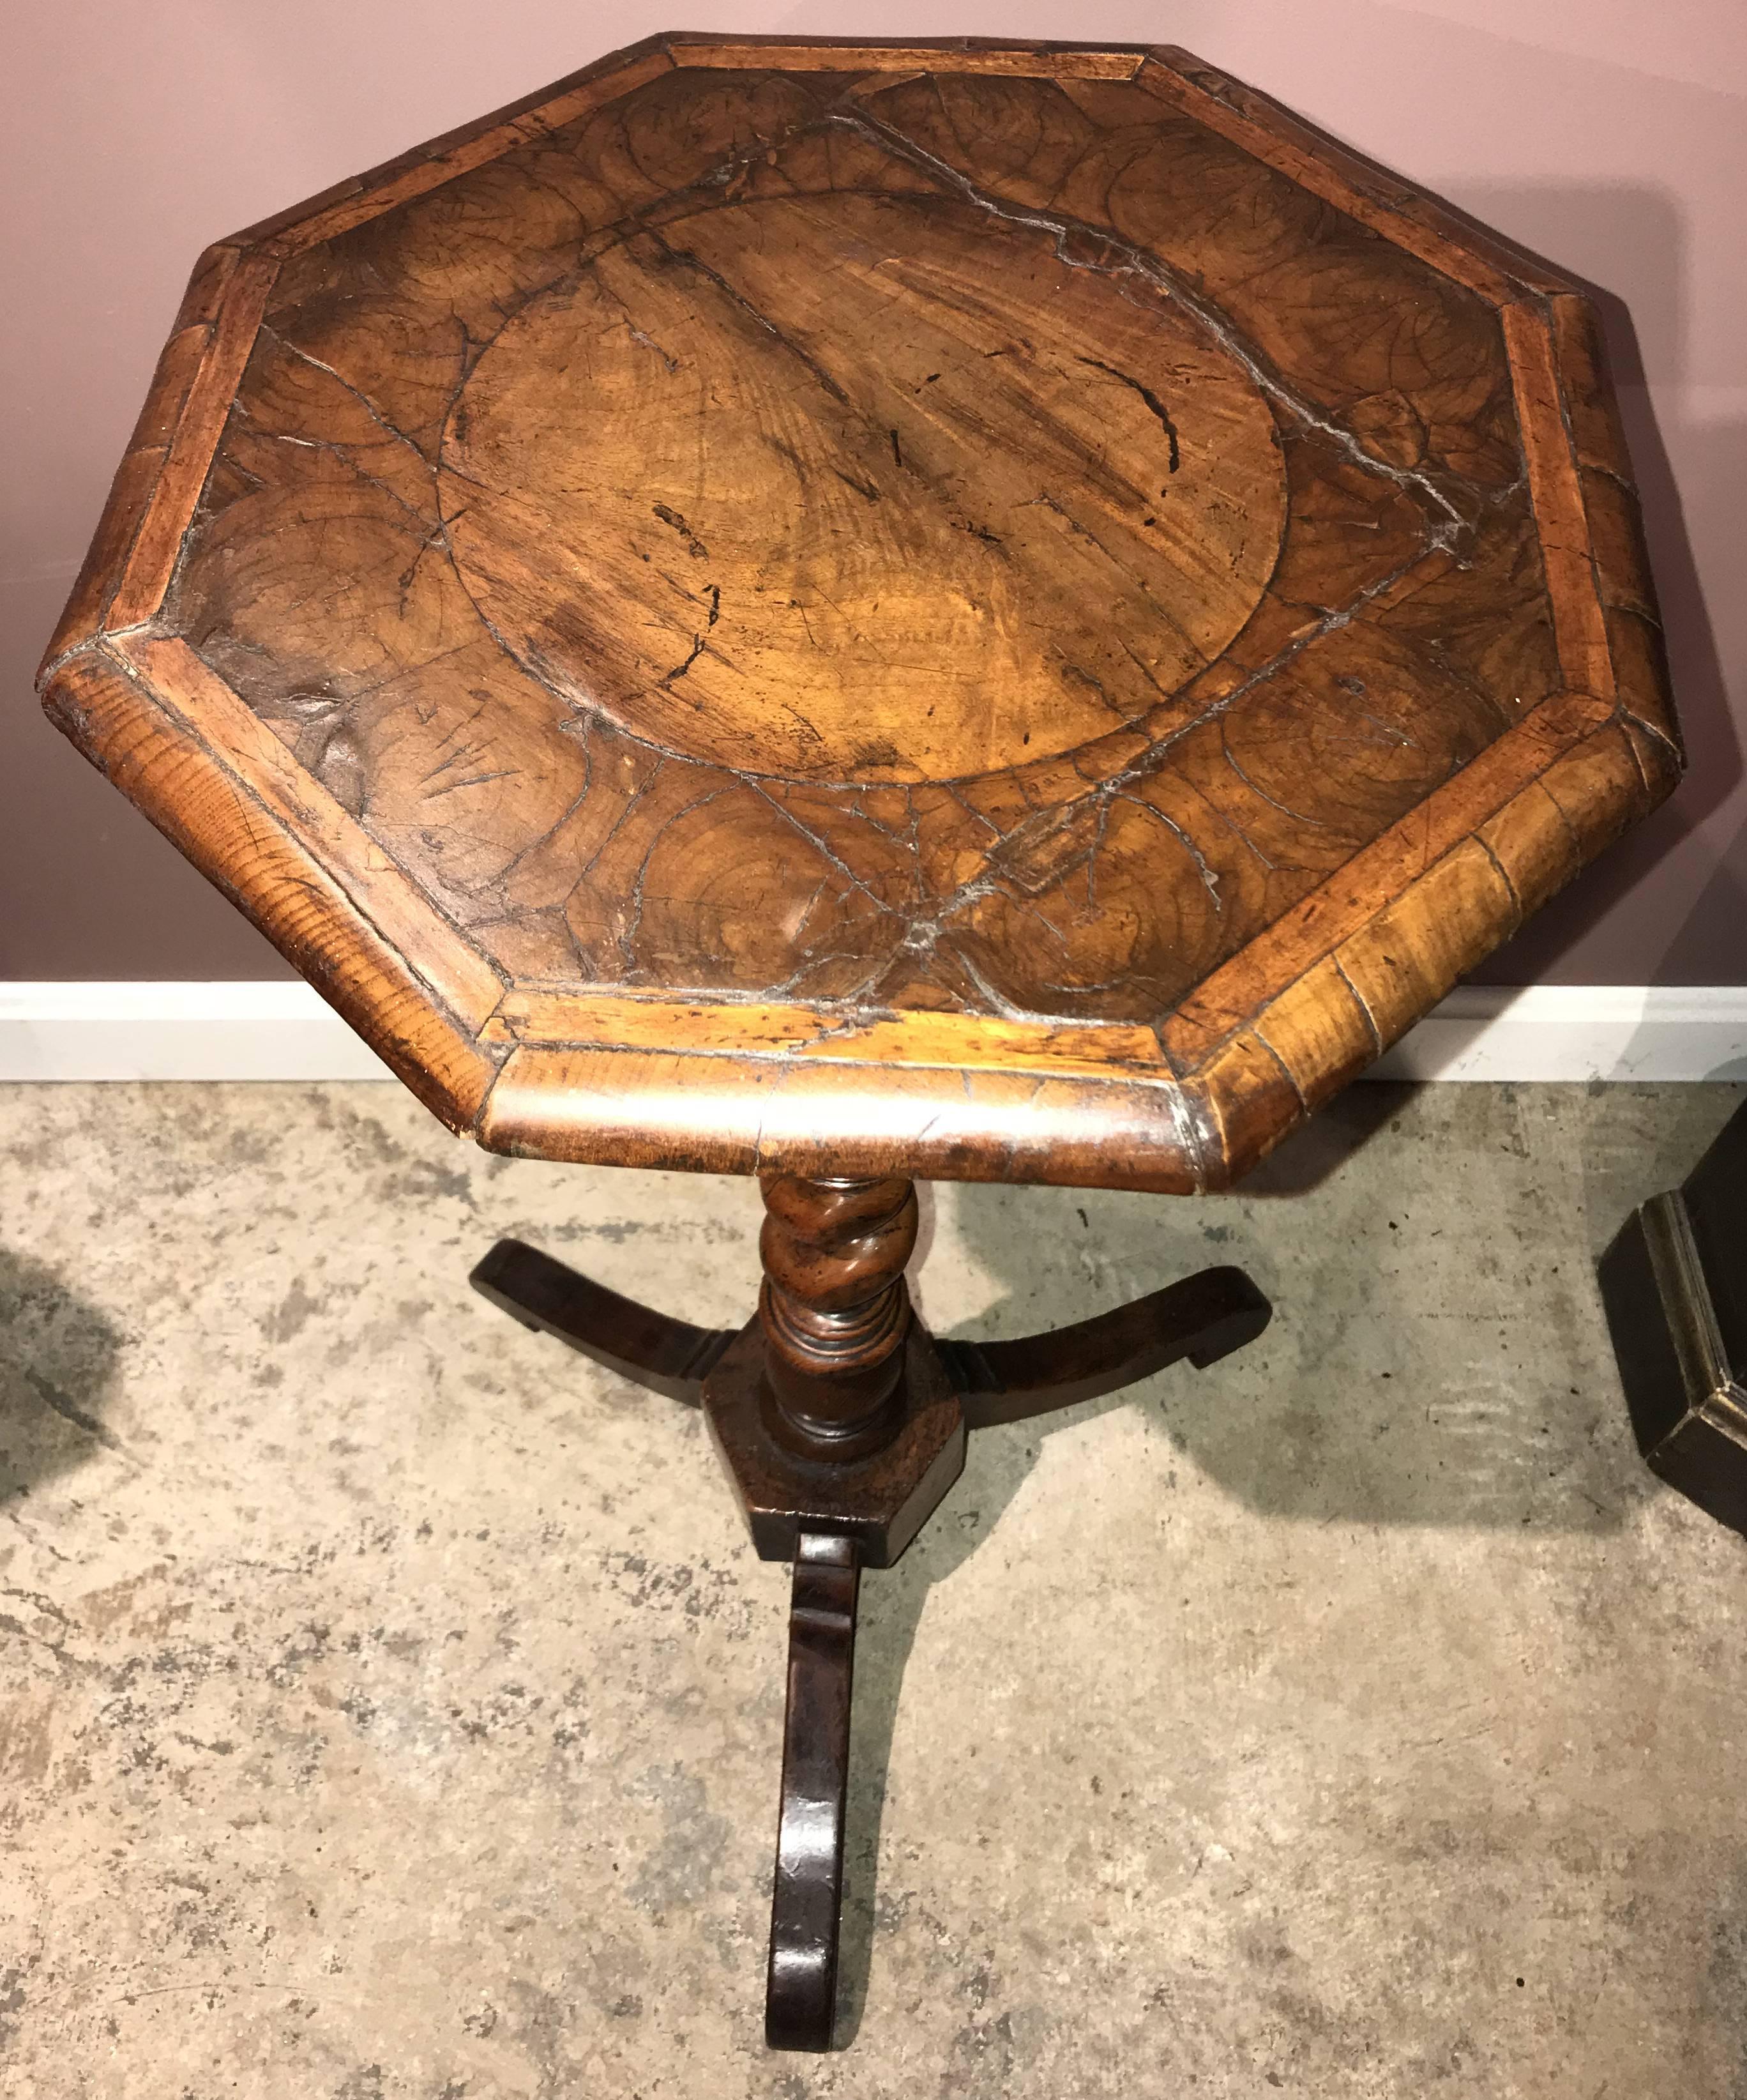 Carved English Walnut Octagonal Top Candle Stand with Marquetry, circa 1680-1710